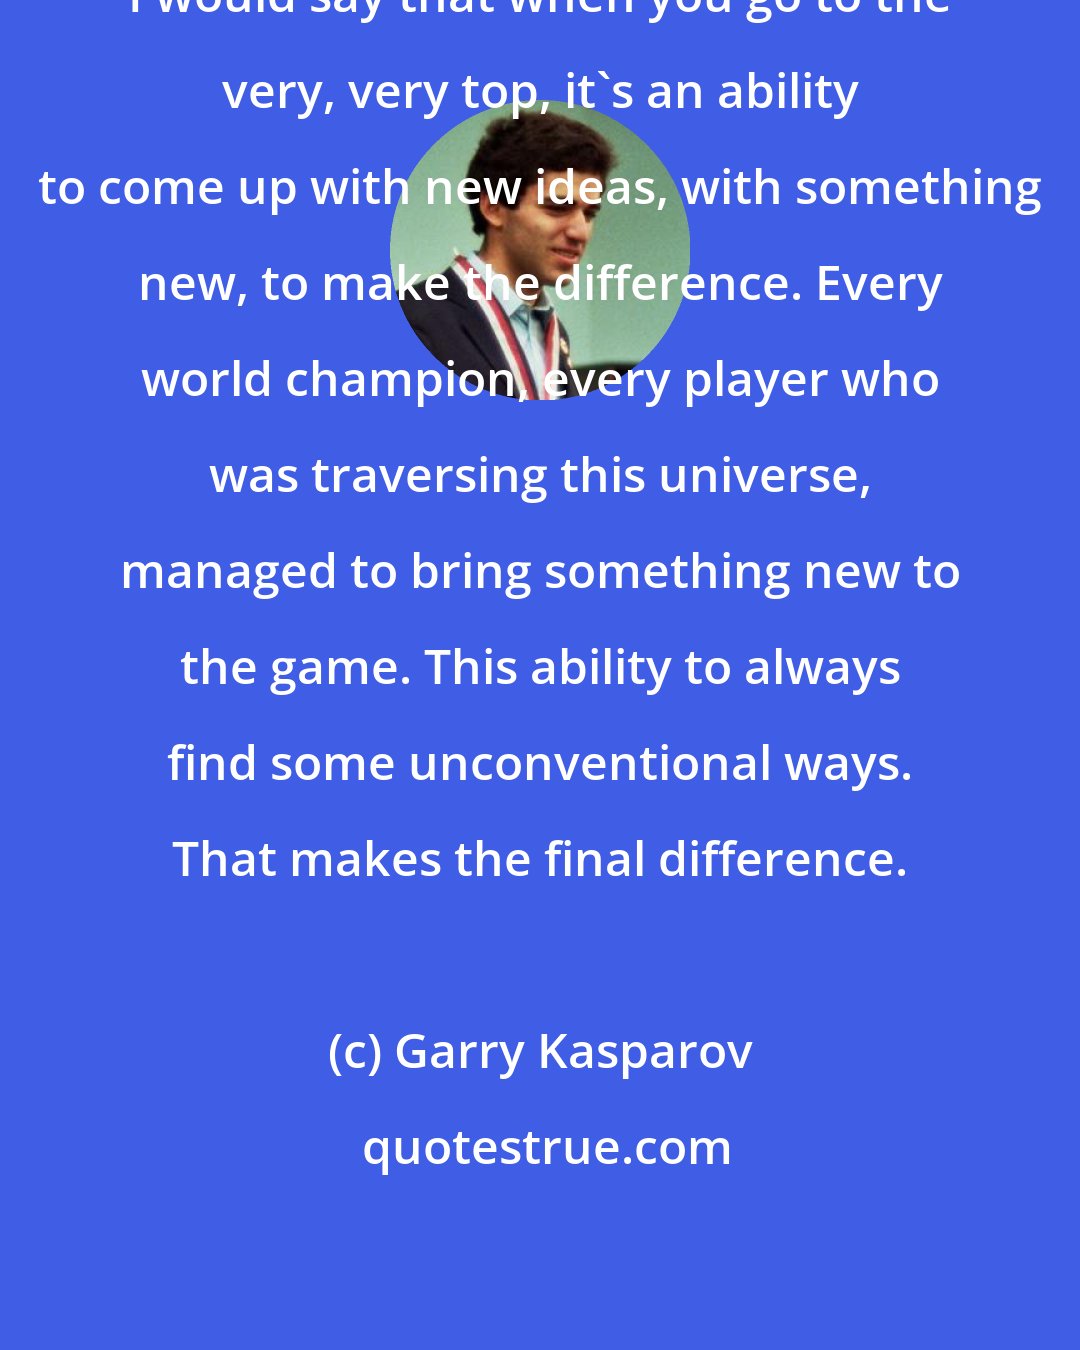 Garry Kasparov: I would say that when you go to the very, very top, it's an ability to come up with new ideas, with something new, to make the difference. Every world champion, every player who was traversing this universe, managed to bring something new to the game. This ability to always find some unconventional ways. That makes the final difference.